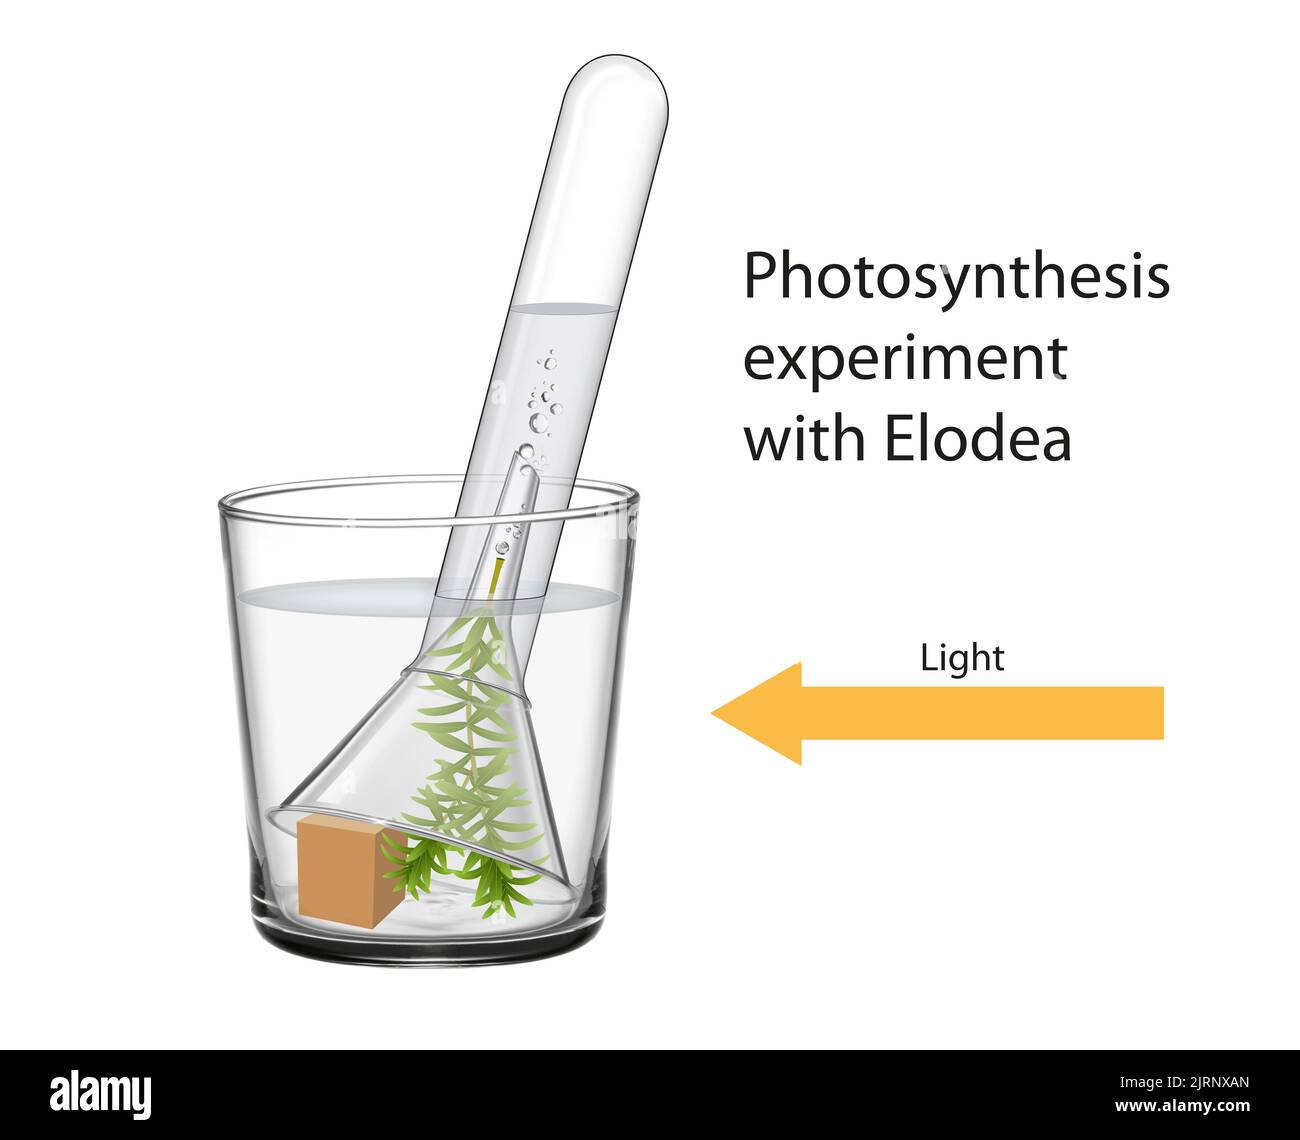 Photosynthesis experiment with Elodea Illustration Stock Photo